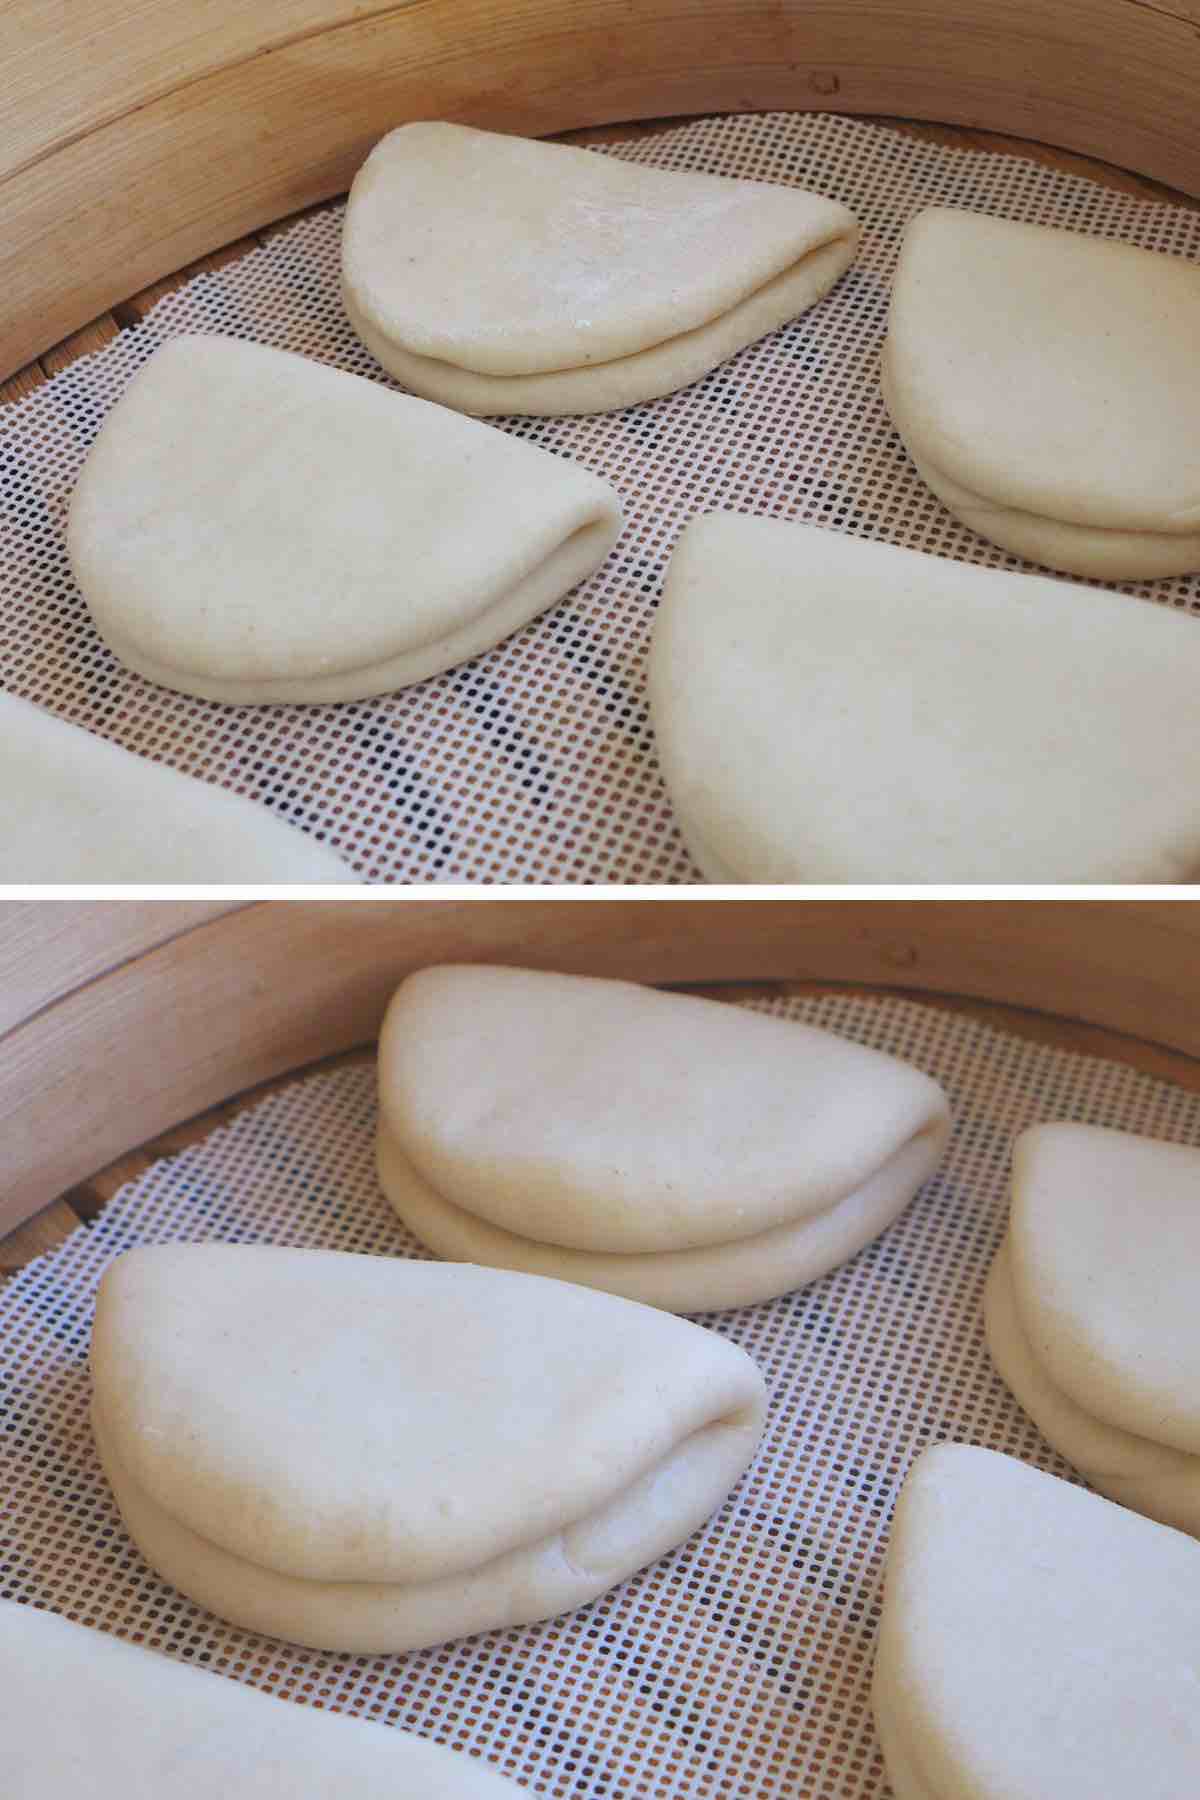 bao buns before and after proofing.